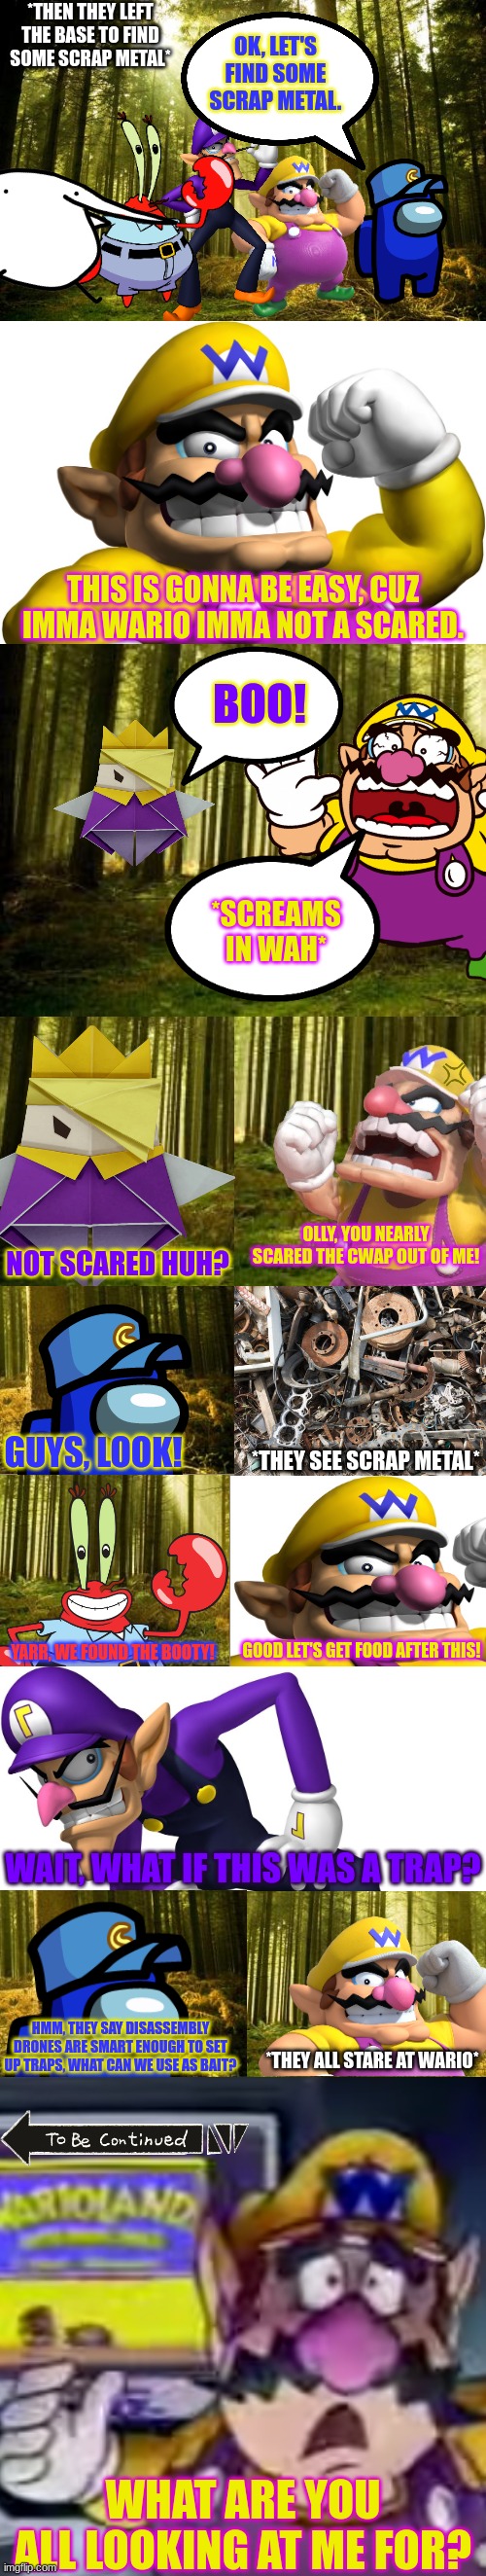 Cam tries to evade Uzi Part 5 | image tagged in murder drones,wario,mr krabs,waluigi,ocs,crossover | made w/ Imgflip meme maker